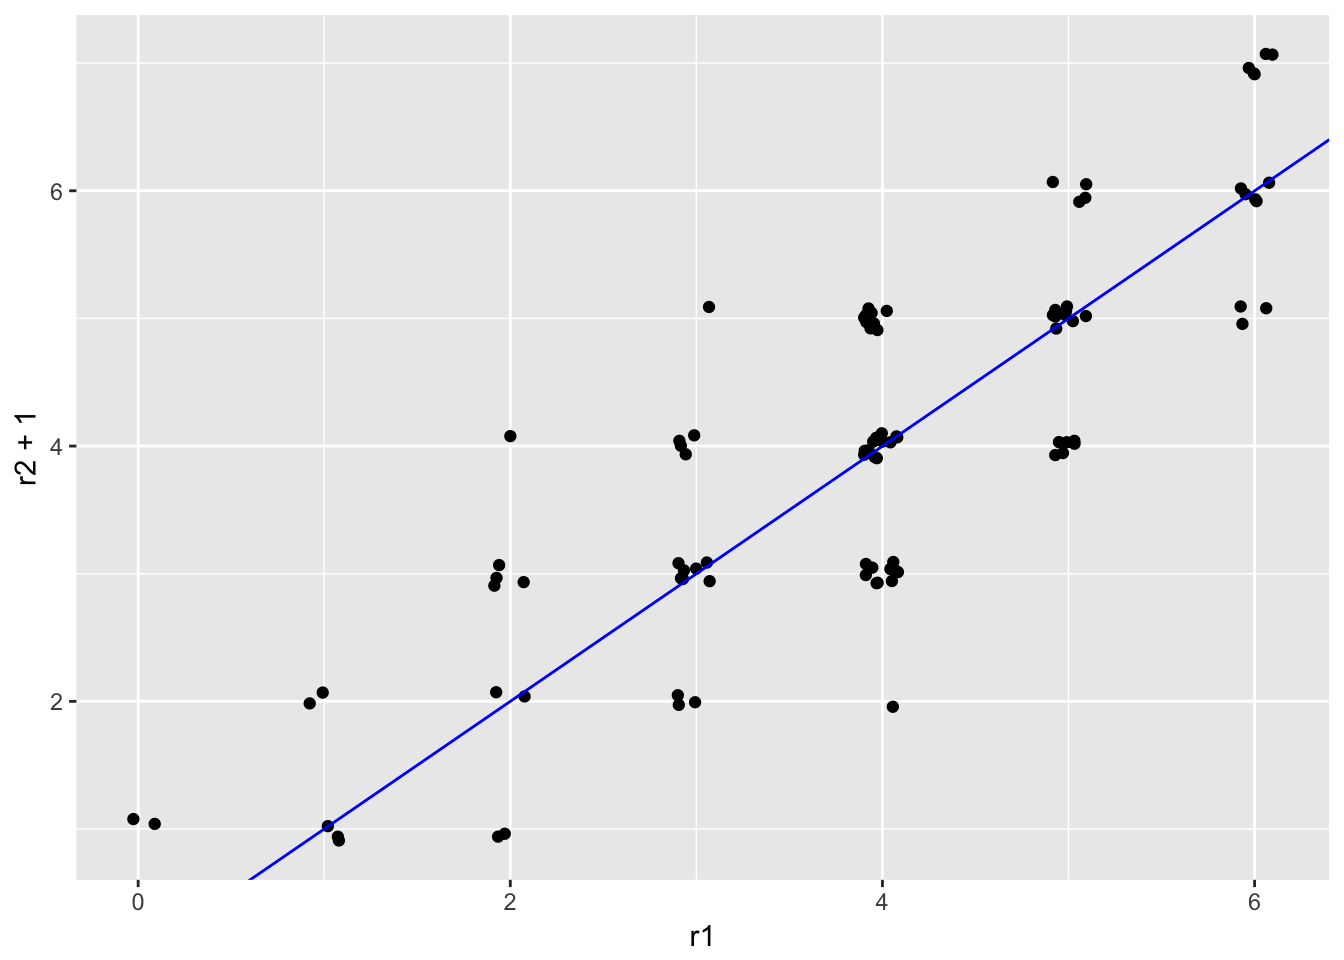 Scatter plots of simulated essay scores with a systematic difference around 0.5 points.